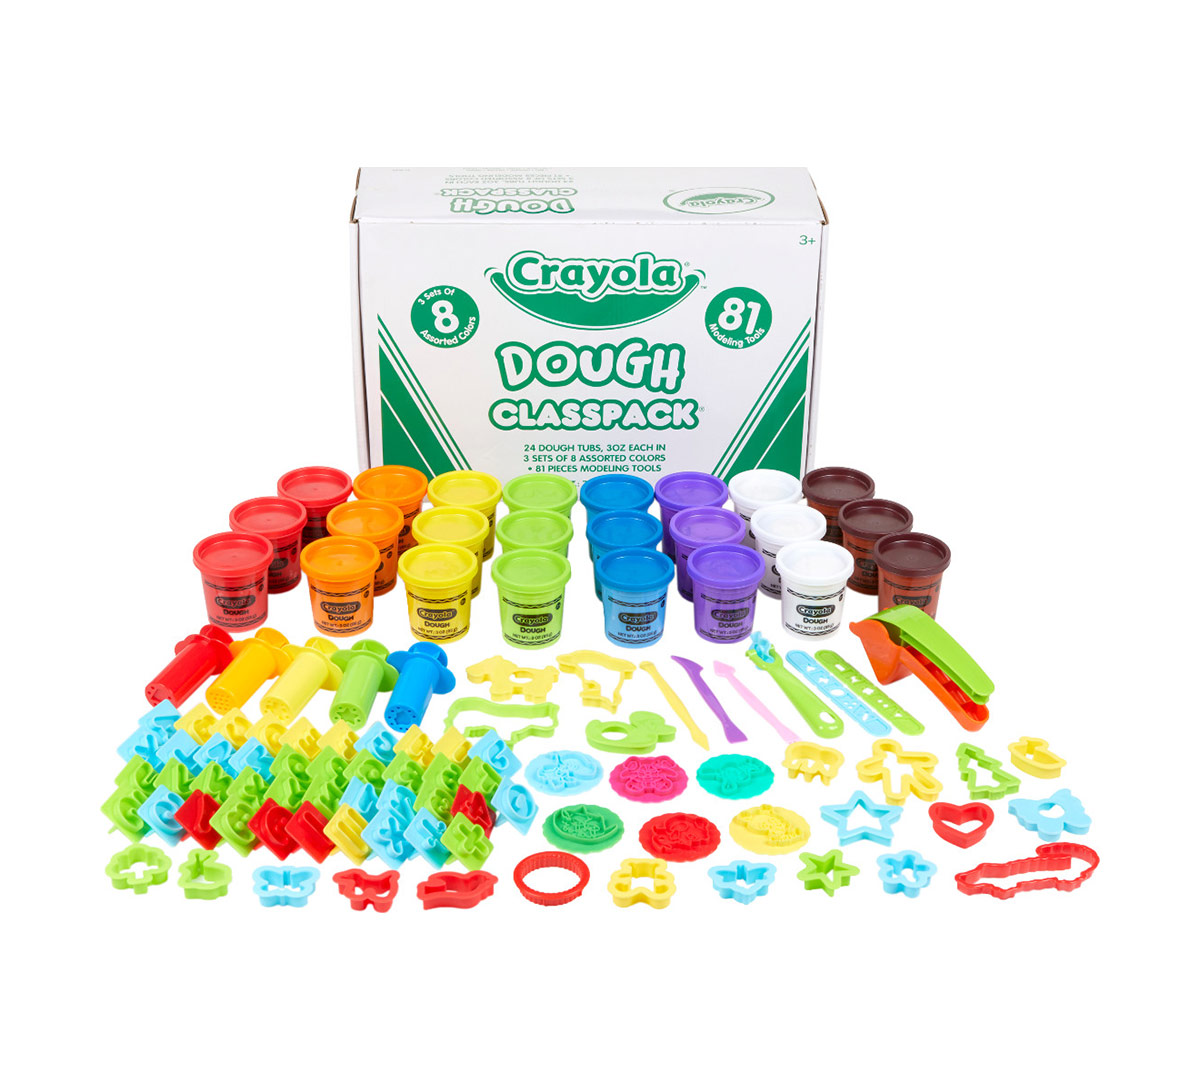 Crayola Modeling Clay Classpack (24 Packs), Bulk Modeling Clay for Kids, 12  Colors, Nontoxic, Classroom Supplies for Kids Arts & Crafts